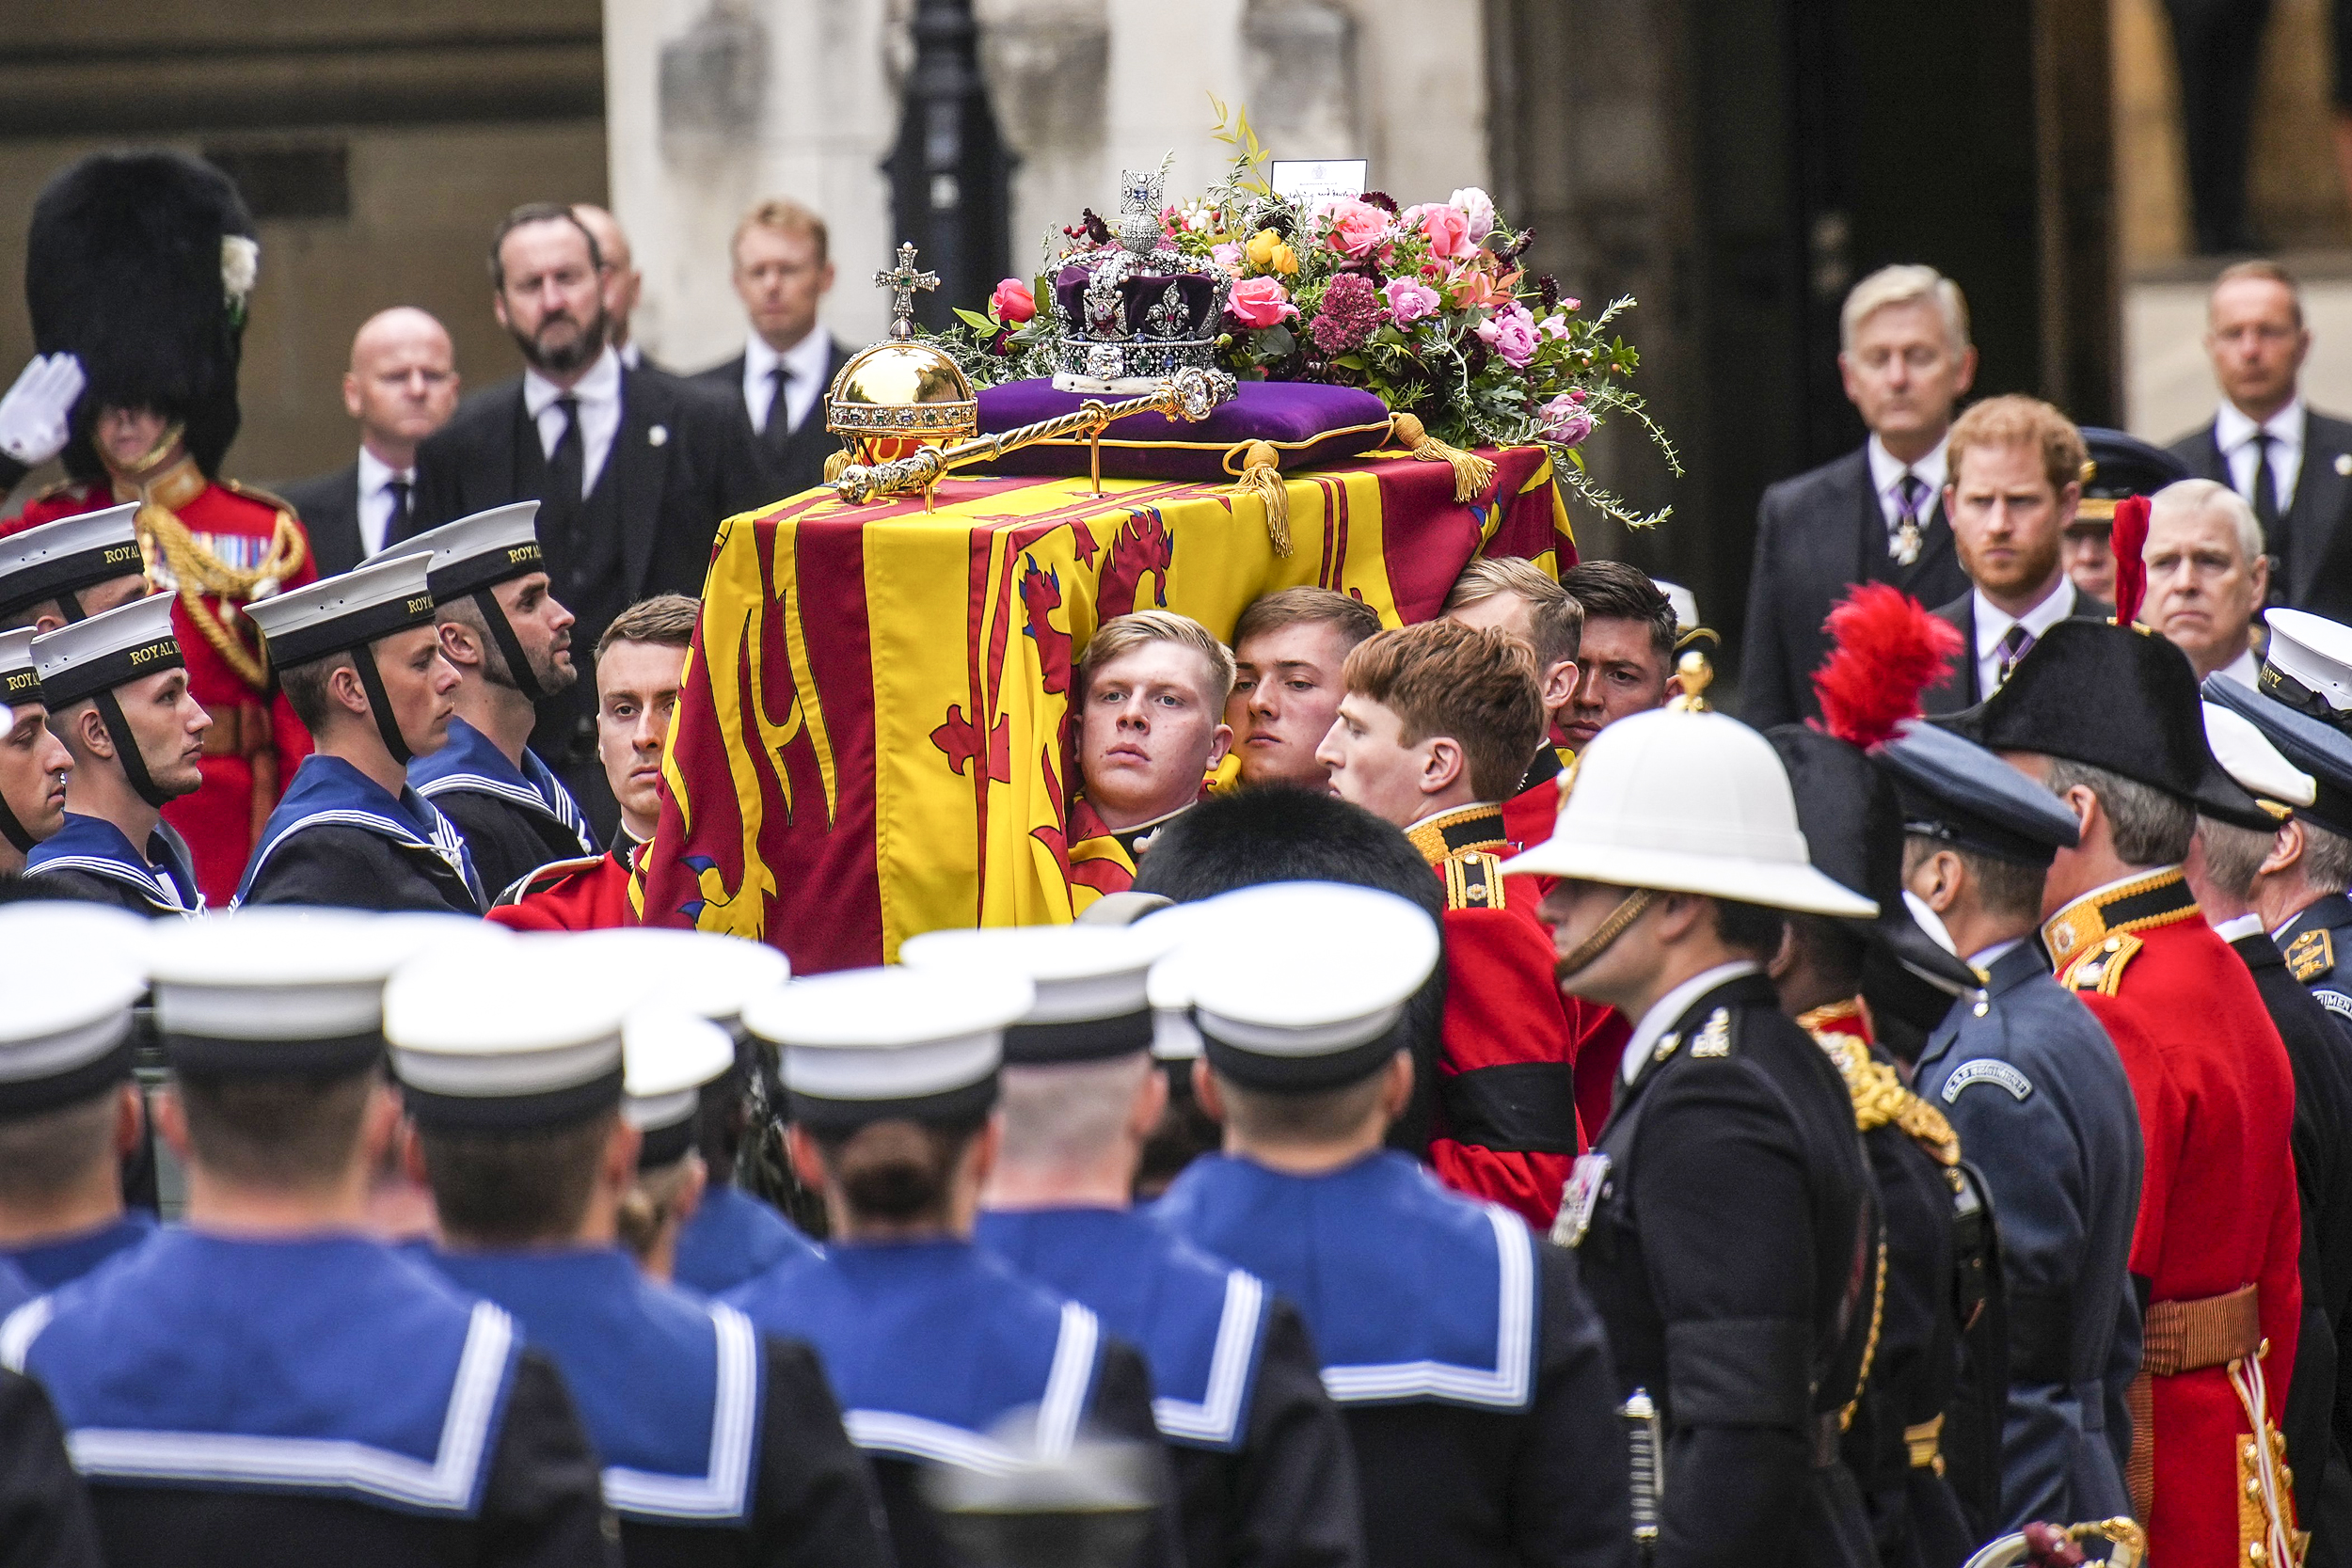 princess diana funeral watched more than queen elizabeth in television